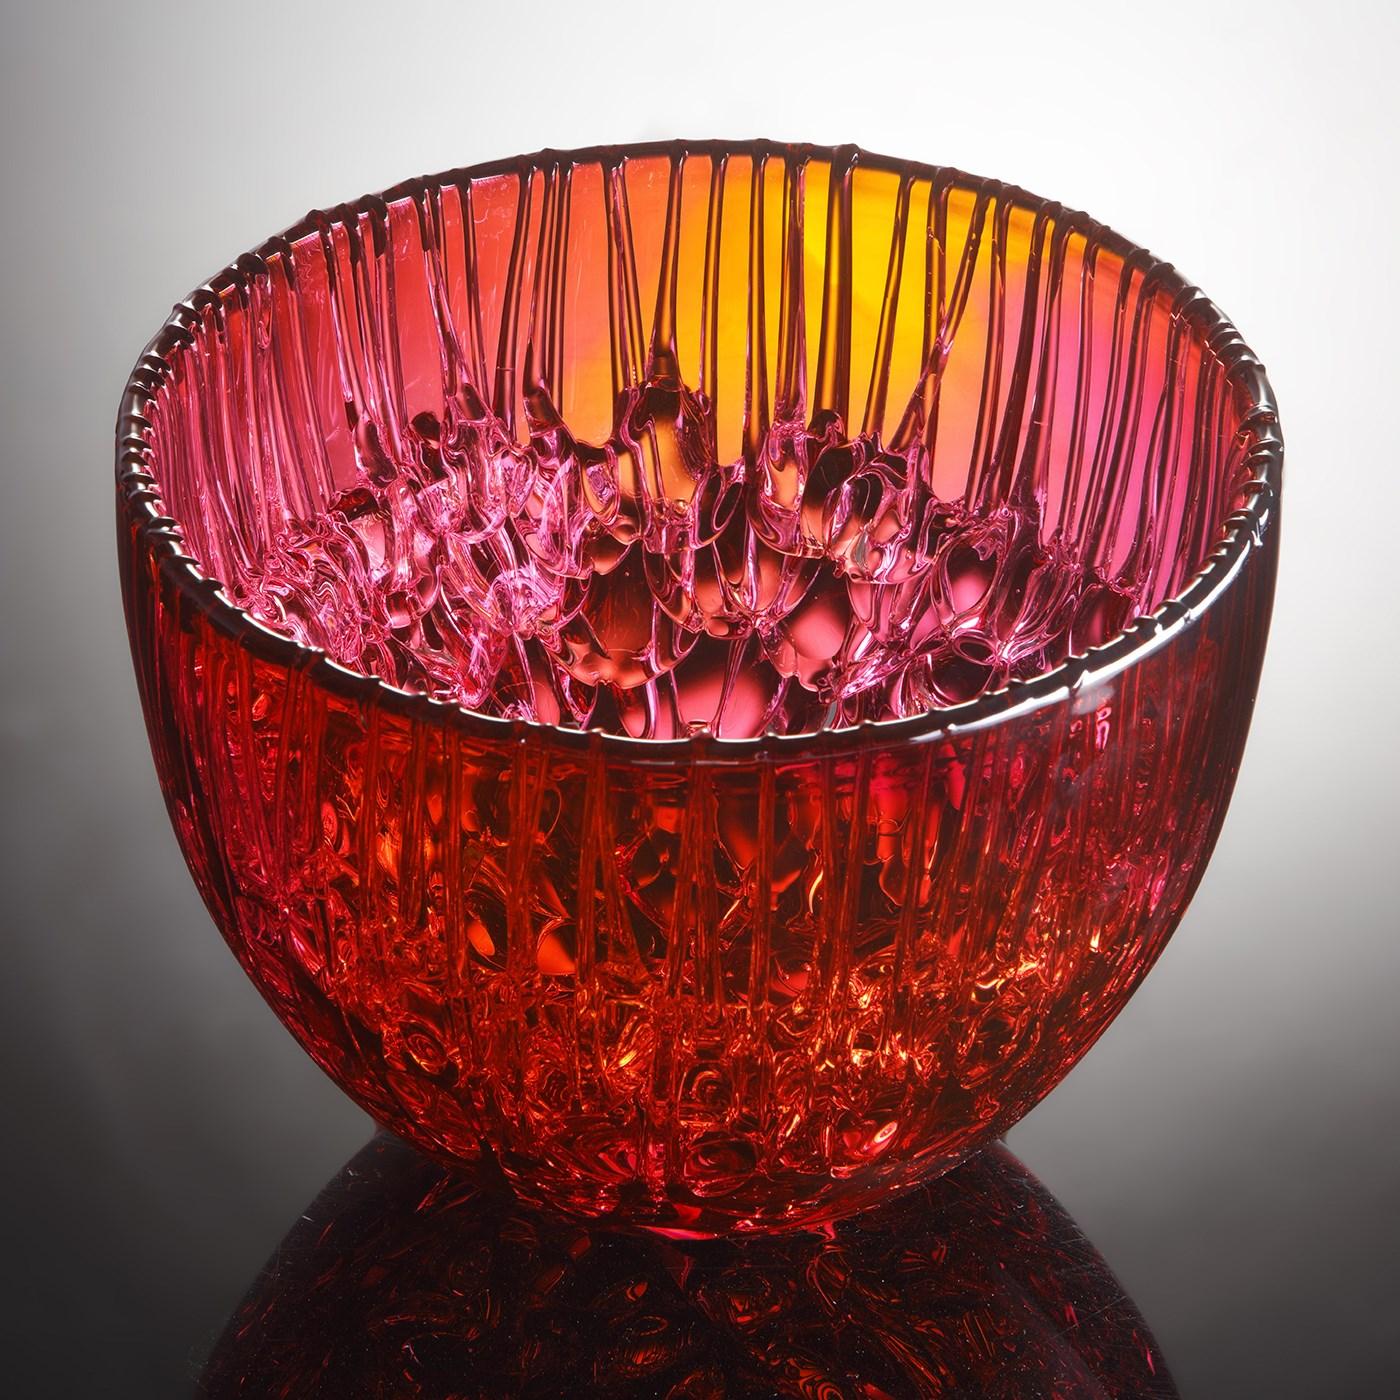 Cassito in Fuchsia & Gold, a Glass Bowl & Centrepiece by Katherine Huskie 6